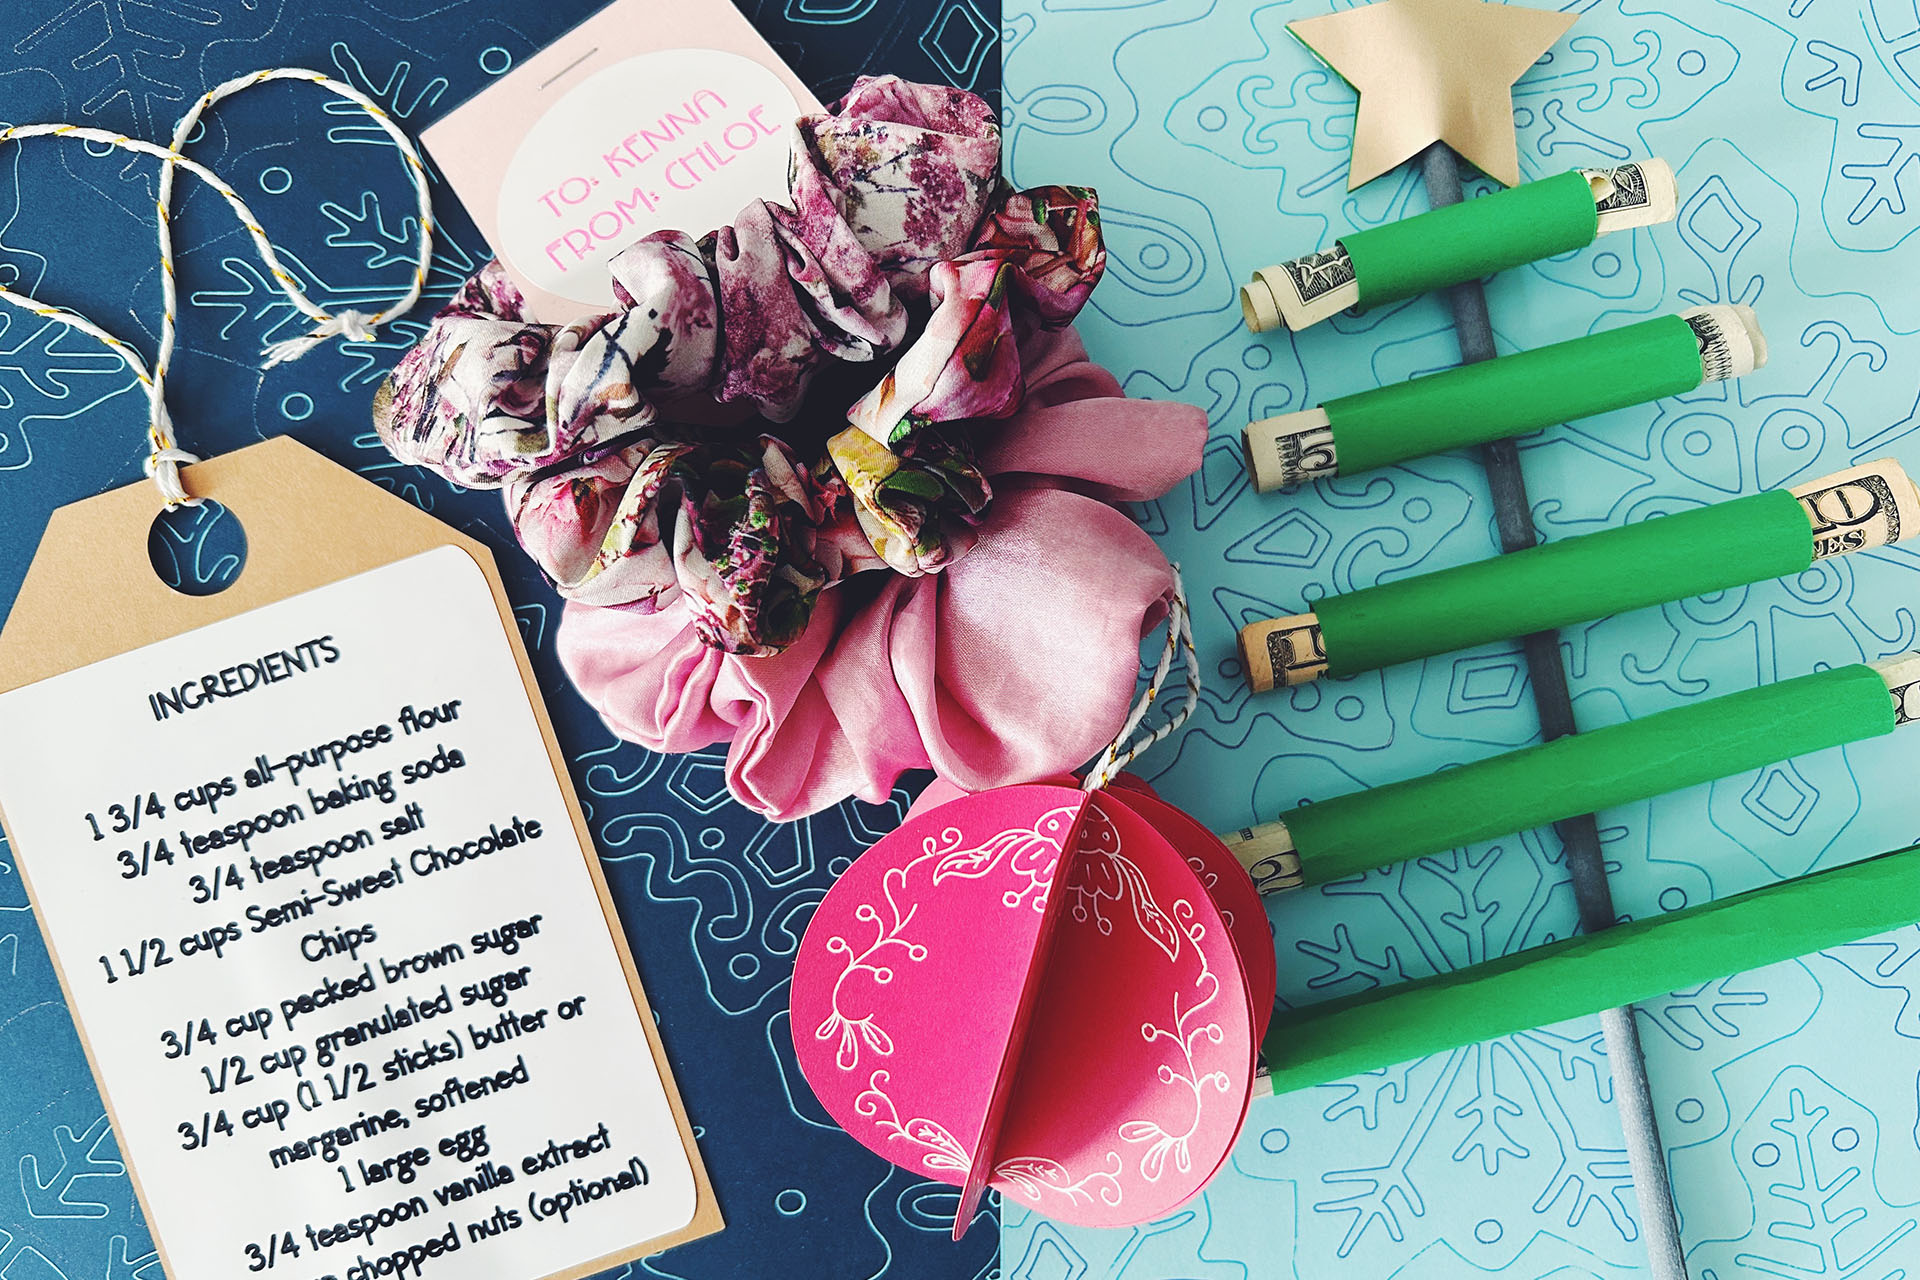 Create some holiday magic with Cricut vinyl and pens